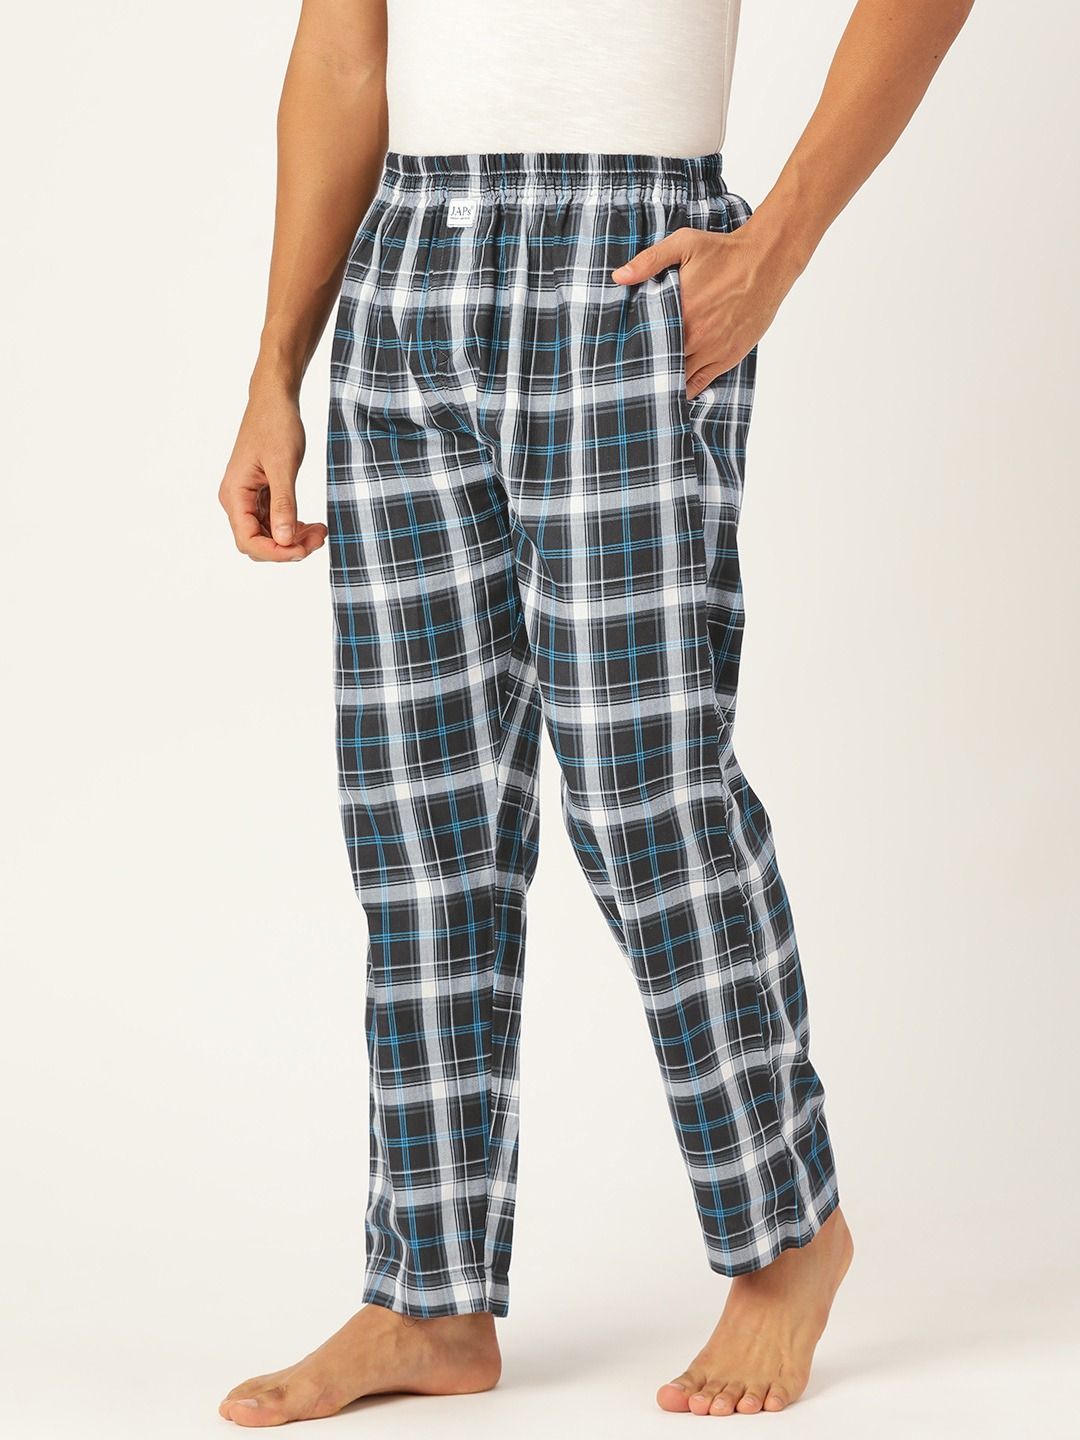 American Active Mens 3 Pack Cotton Flannel Lounge Pajama Sleep Pants 3XL  4850 3 Pack  Classics Flannel Winter Red Assorted Plaids at Amazon Mens  Clothing store